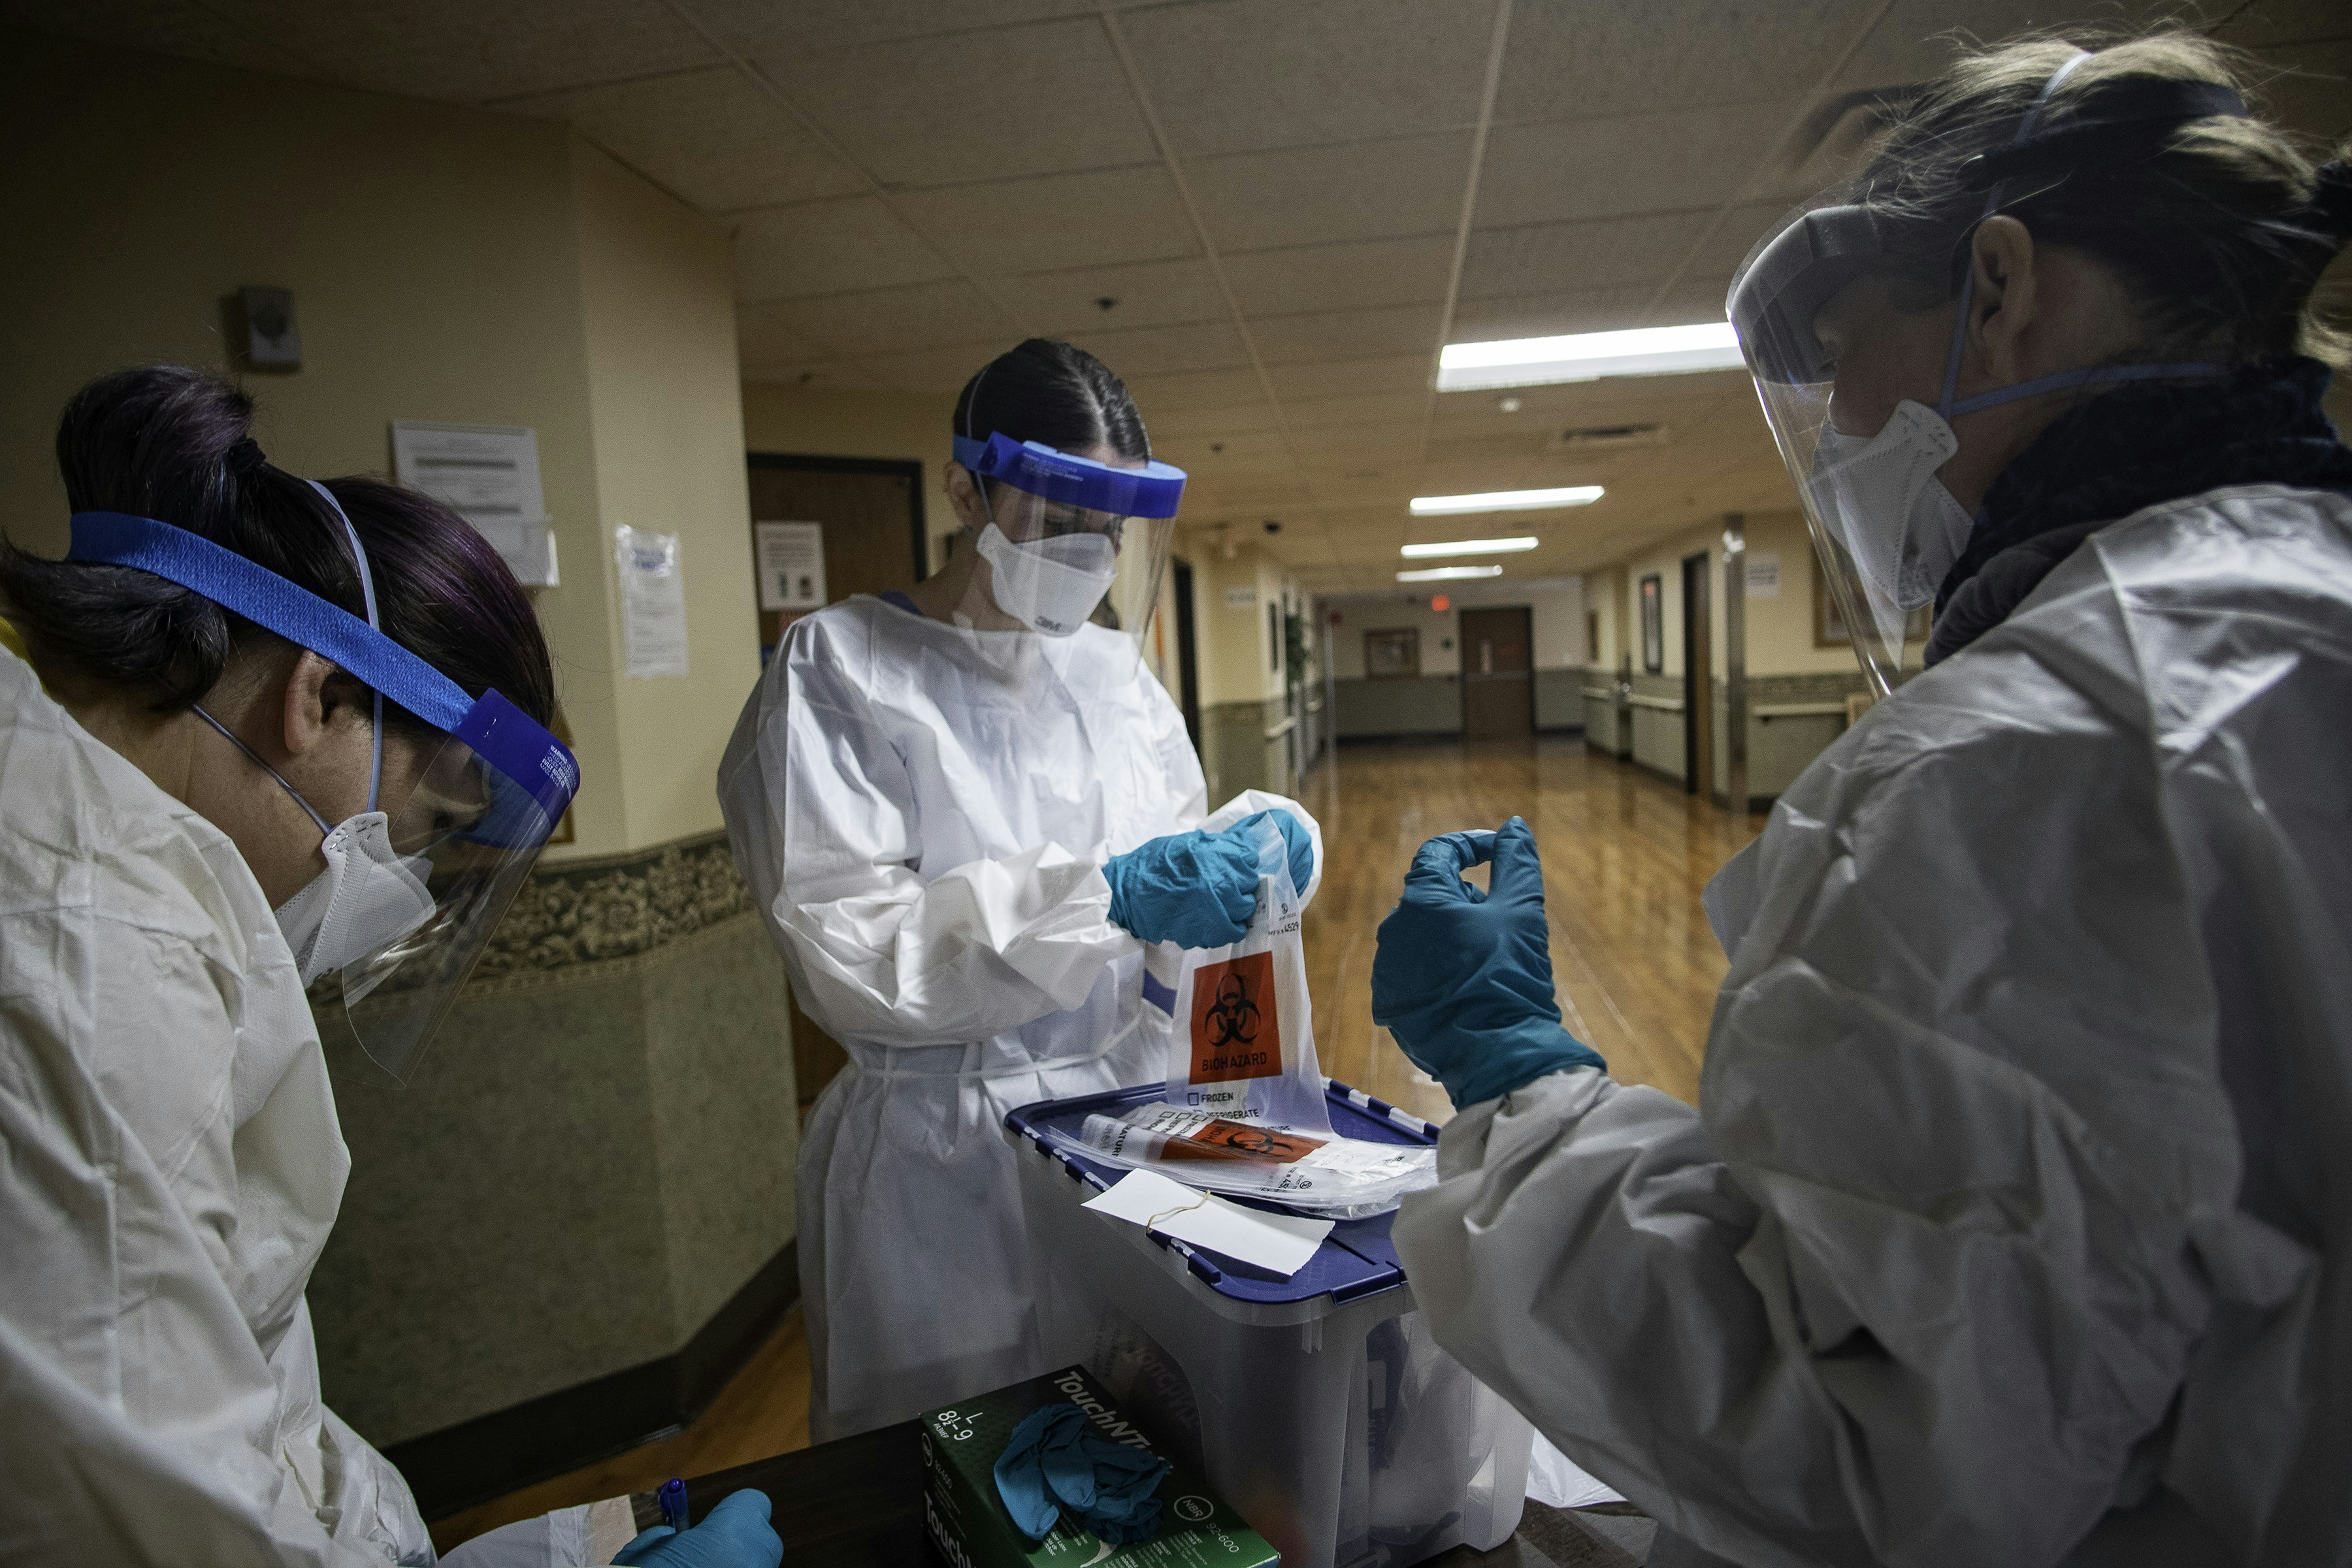 In this April 2020 photo, a team of three volunteers was preparing swabs to test residents of a skilled nursing facility in Detroit, Michigan, for COVID-19. The volunteer at right, would collect the specimen from the resident. The volunteer in the center, would then retrieve and store the specimen in viral transport media, while the member on the left, identified pre-labeled biohazard bags for specimen collection.